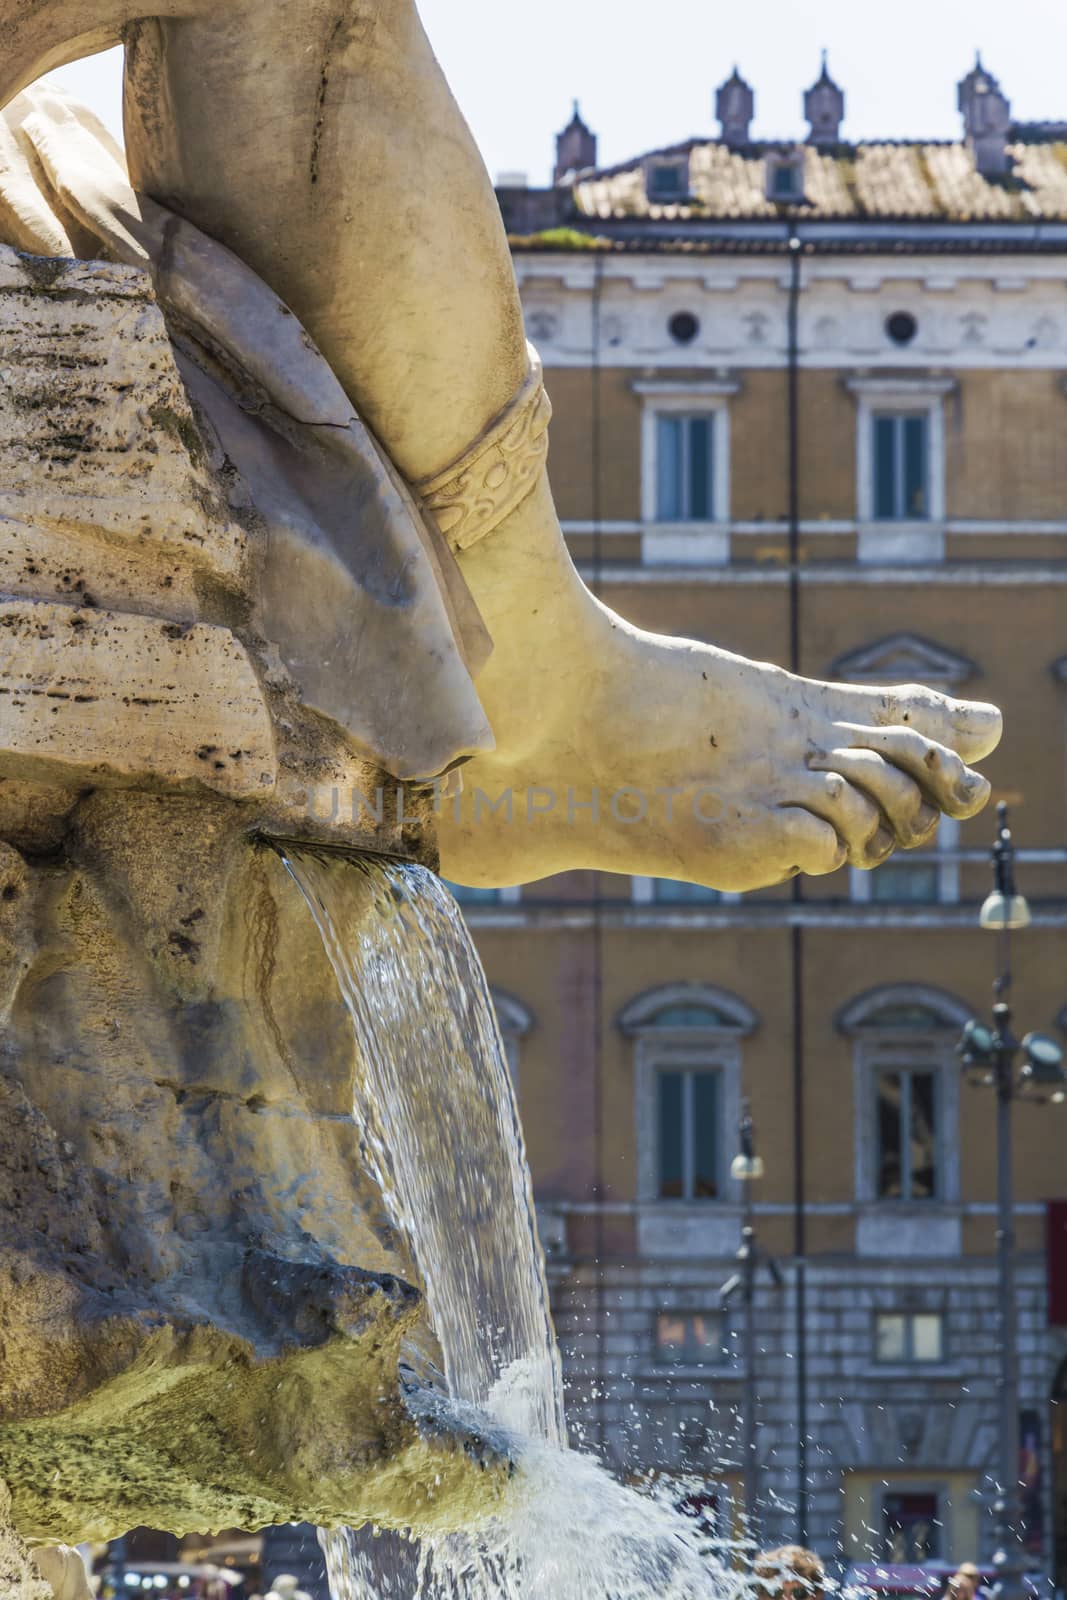 the marble foot of Rio de la Plata statue with gushing water in piazza navona, Rome